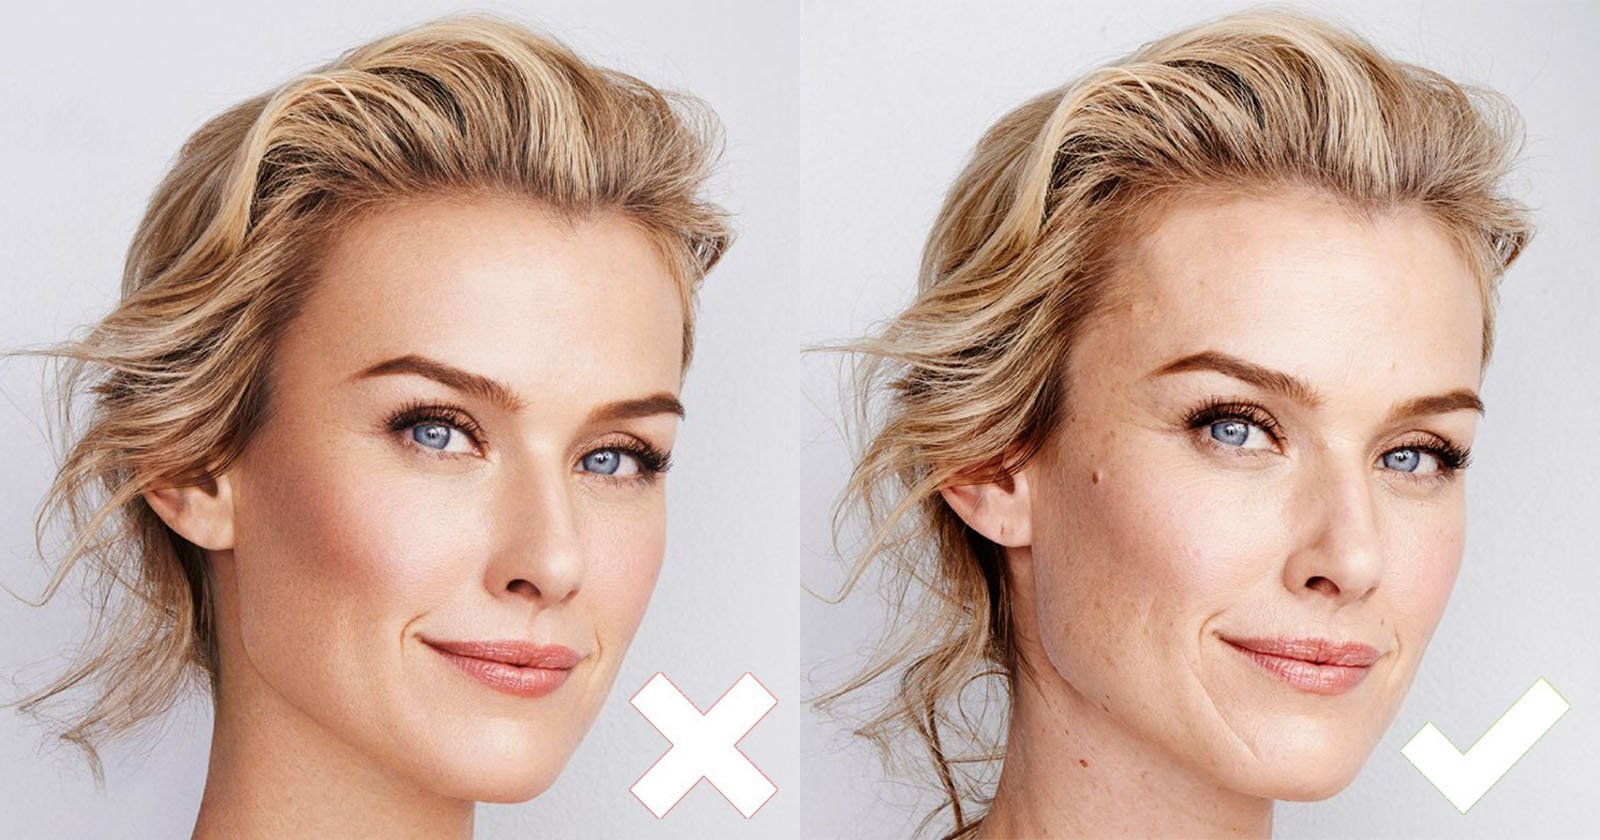 cvs bans photoshop in its beauty product photos